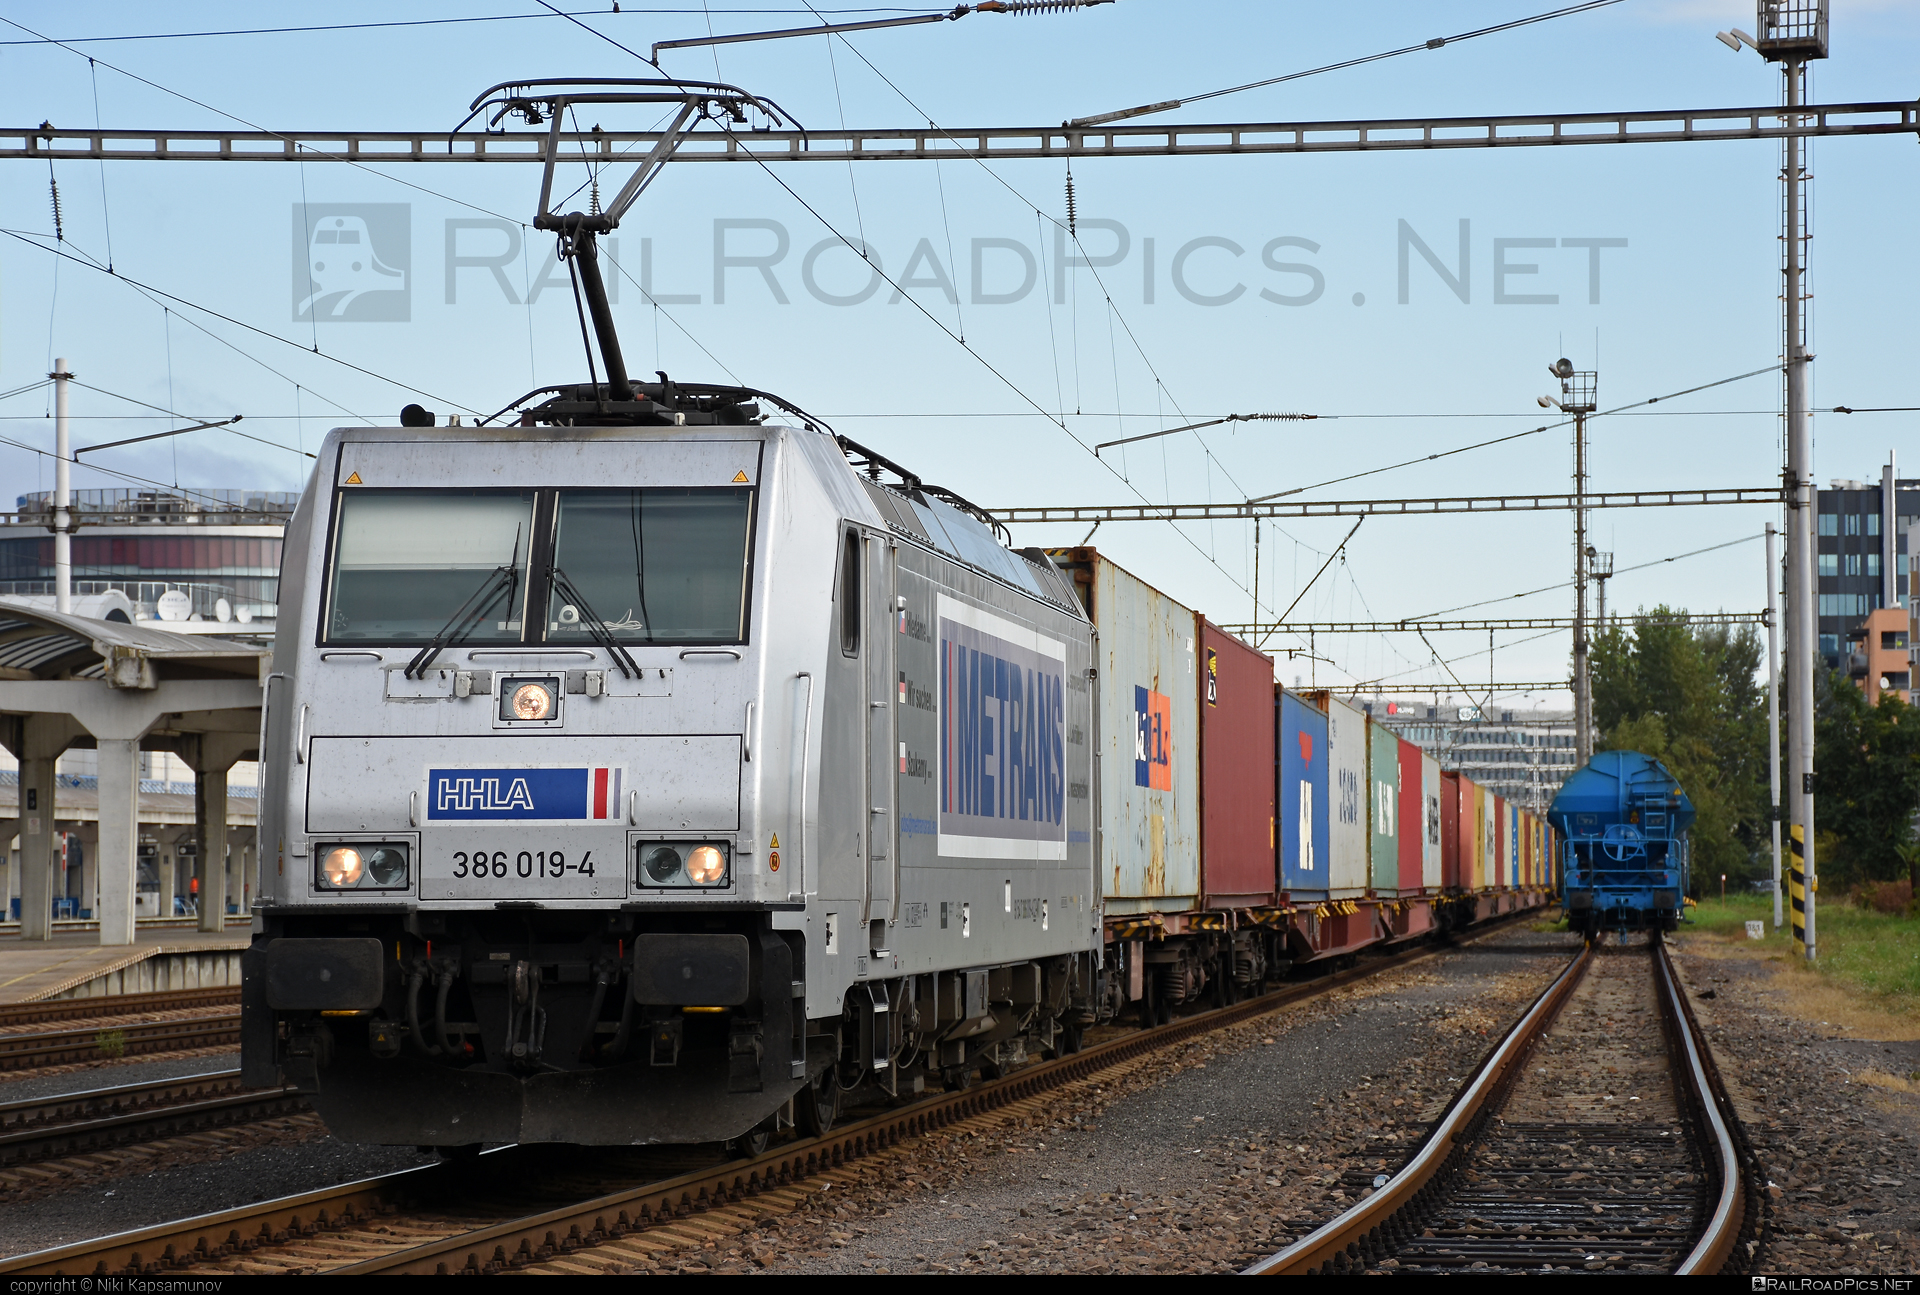 Bombardier TRAXX F140 MS - 386 019-4 operated by METRANS Rail s.r.o. #bombardier #bombardiertraxx #flatwagon #hhla #metrans #metransrail #traxx #traxxf140 #traxxf140ms